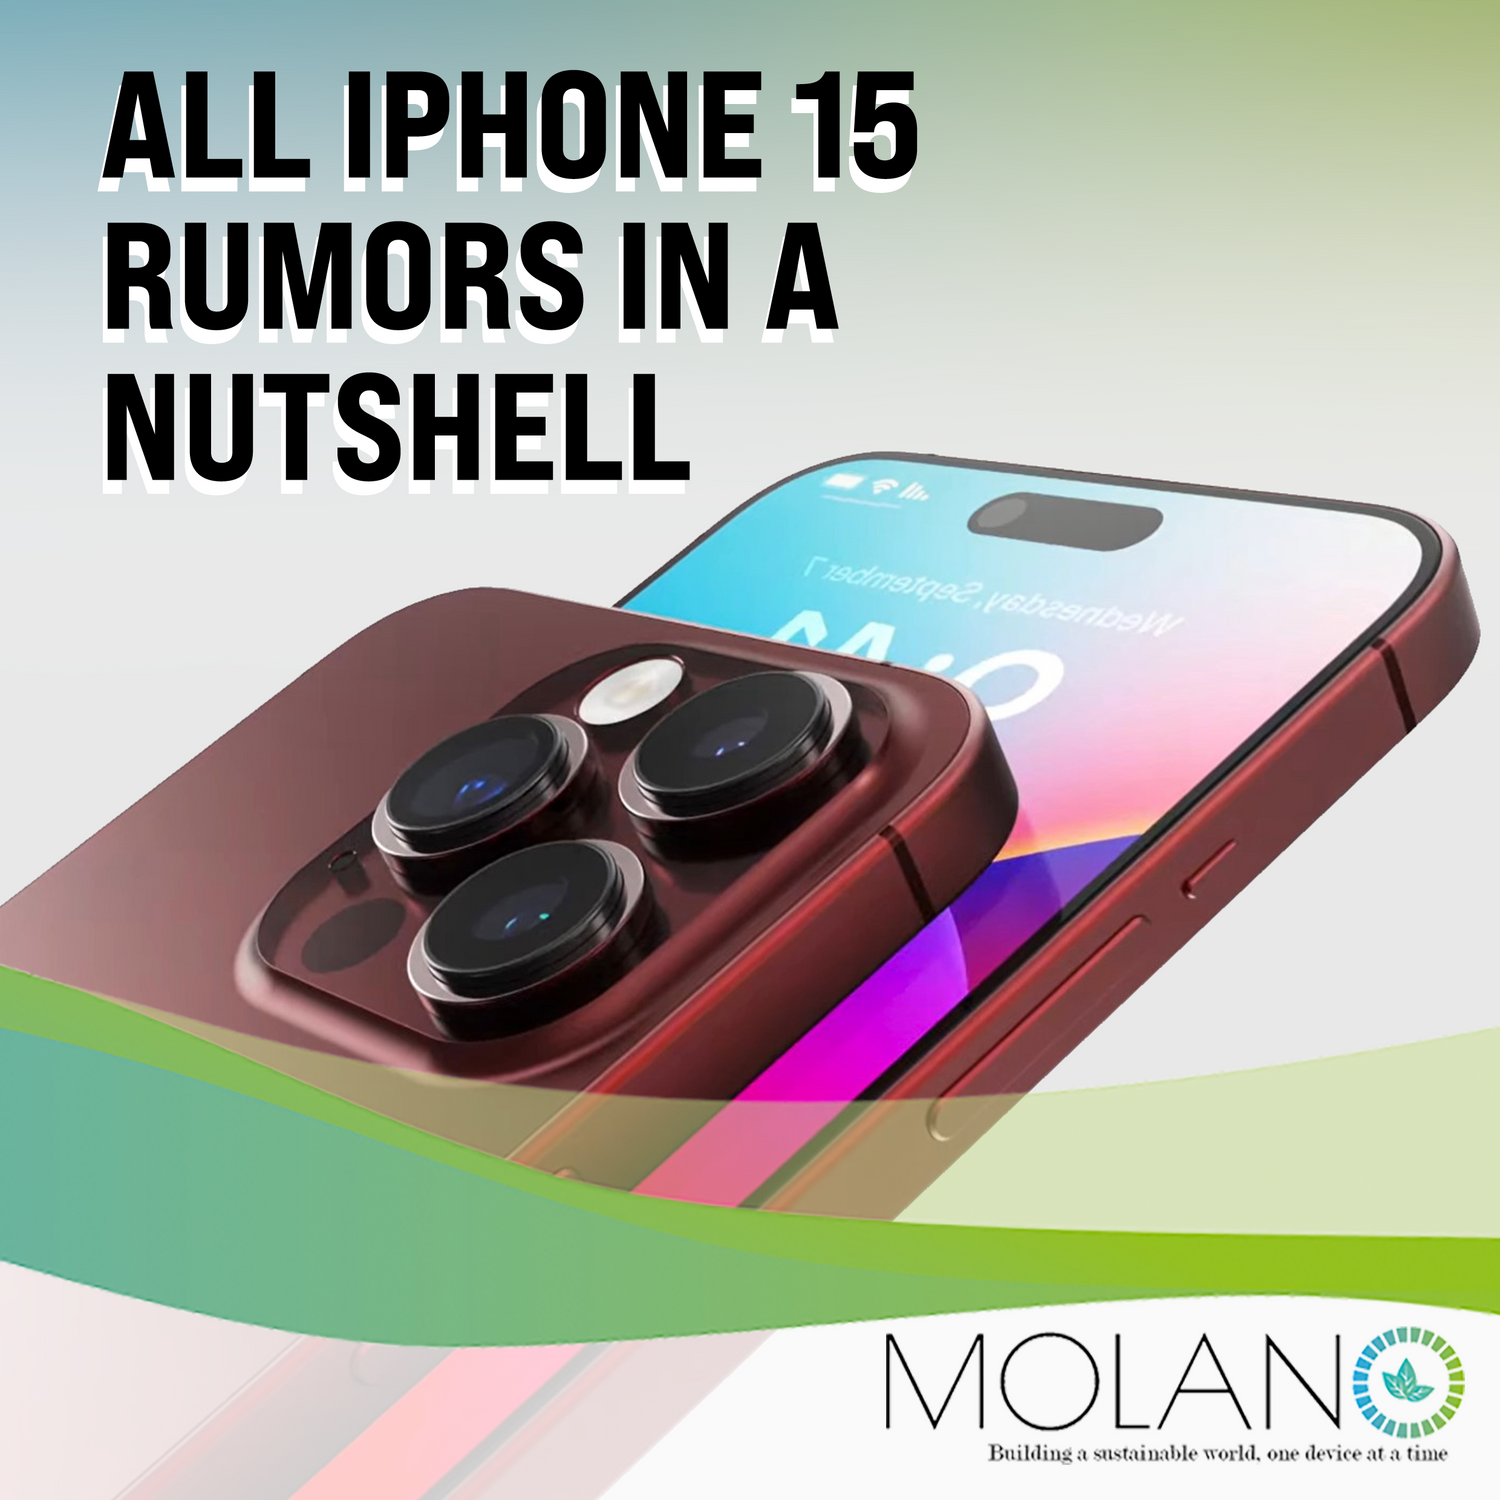 All iPhone 15 rumors in a nutshell